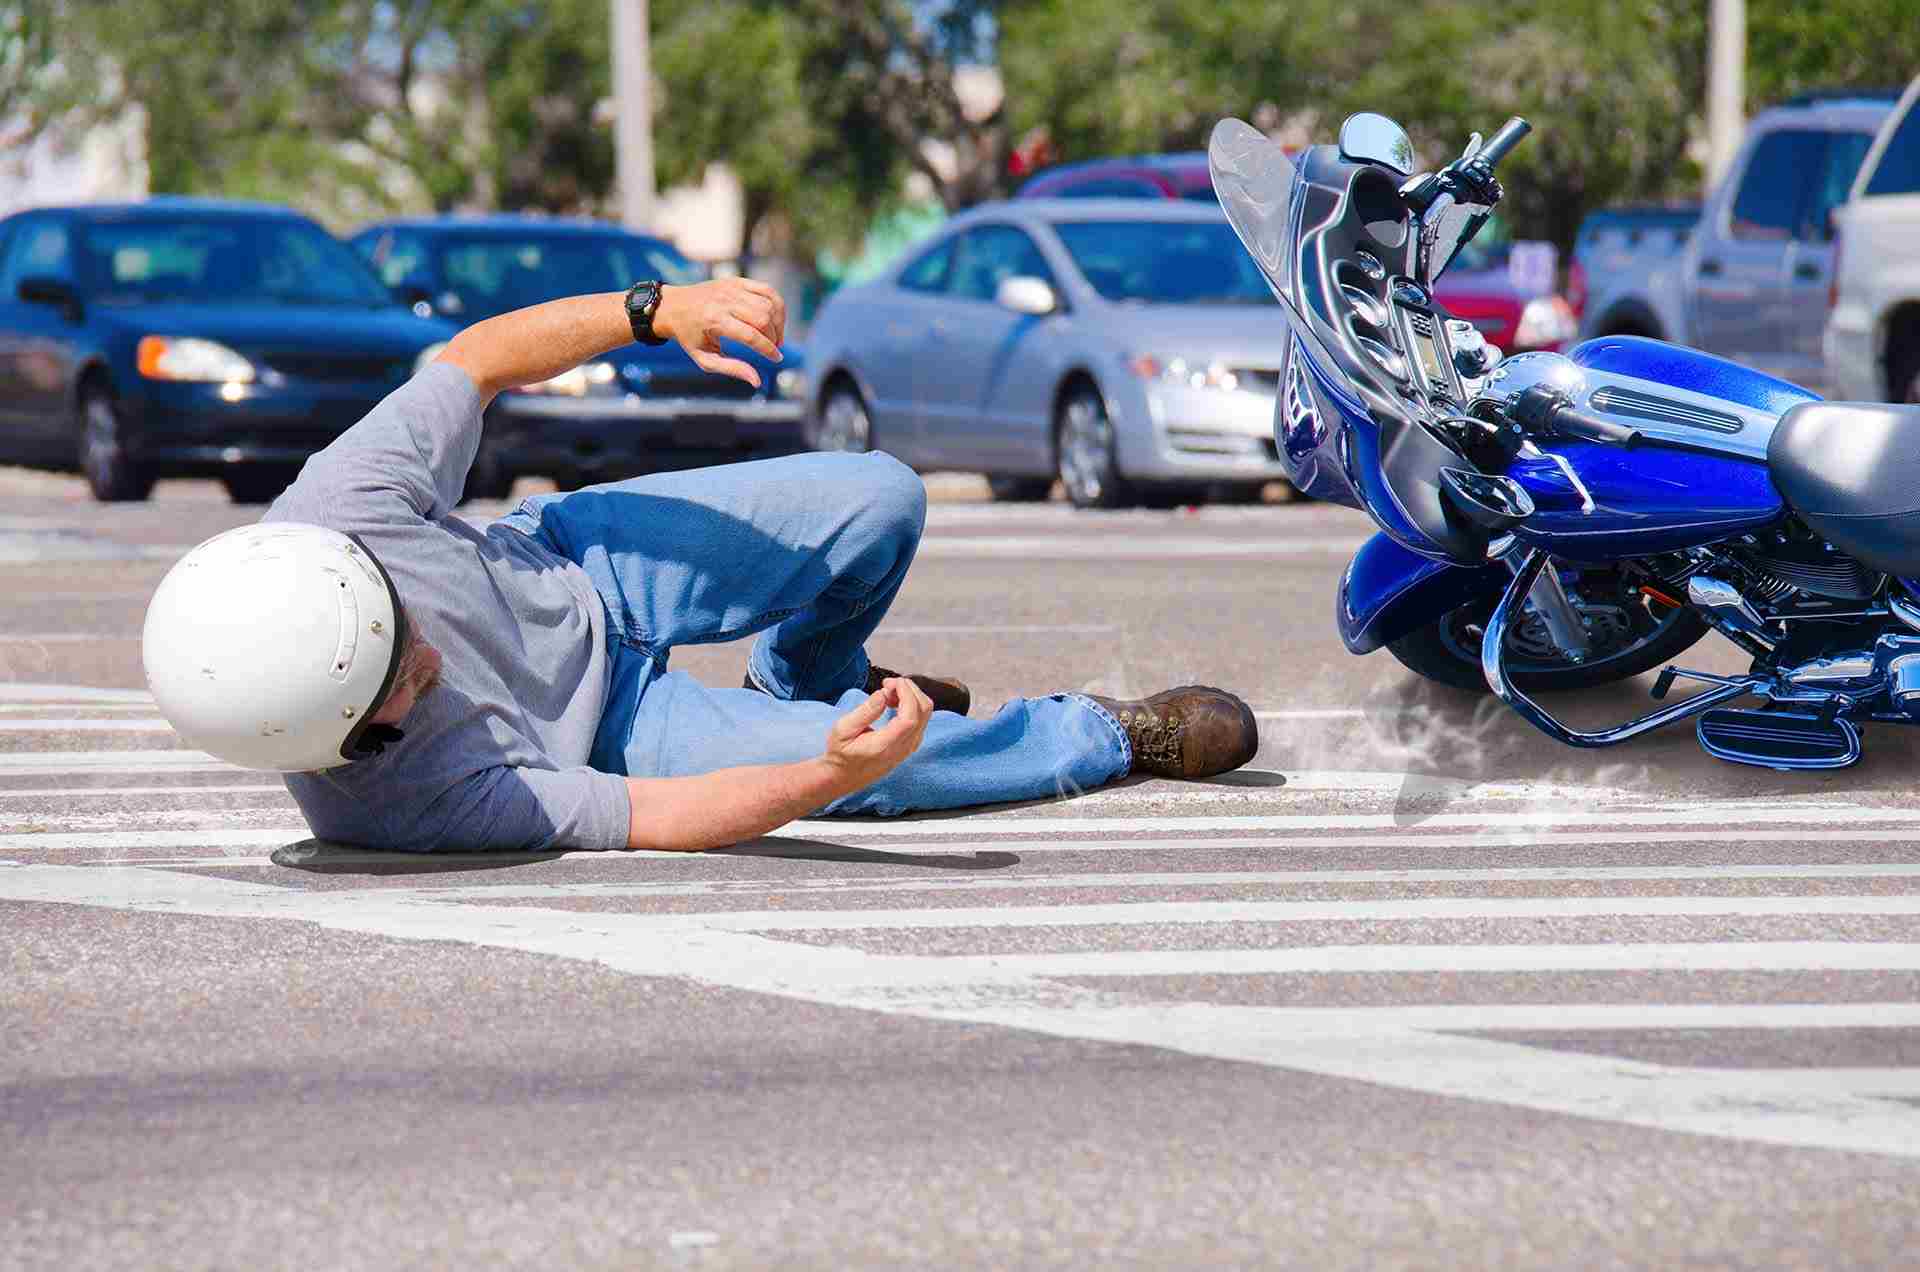 The Most Important Things You Should Know About Motorcycle Accident Claims